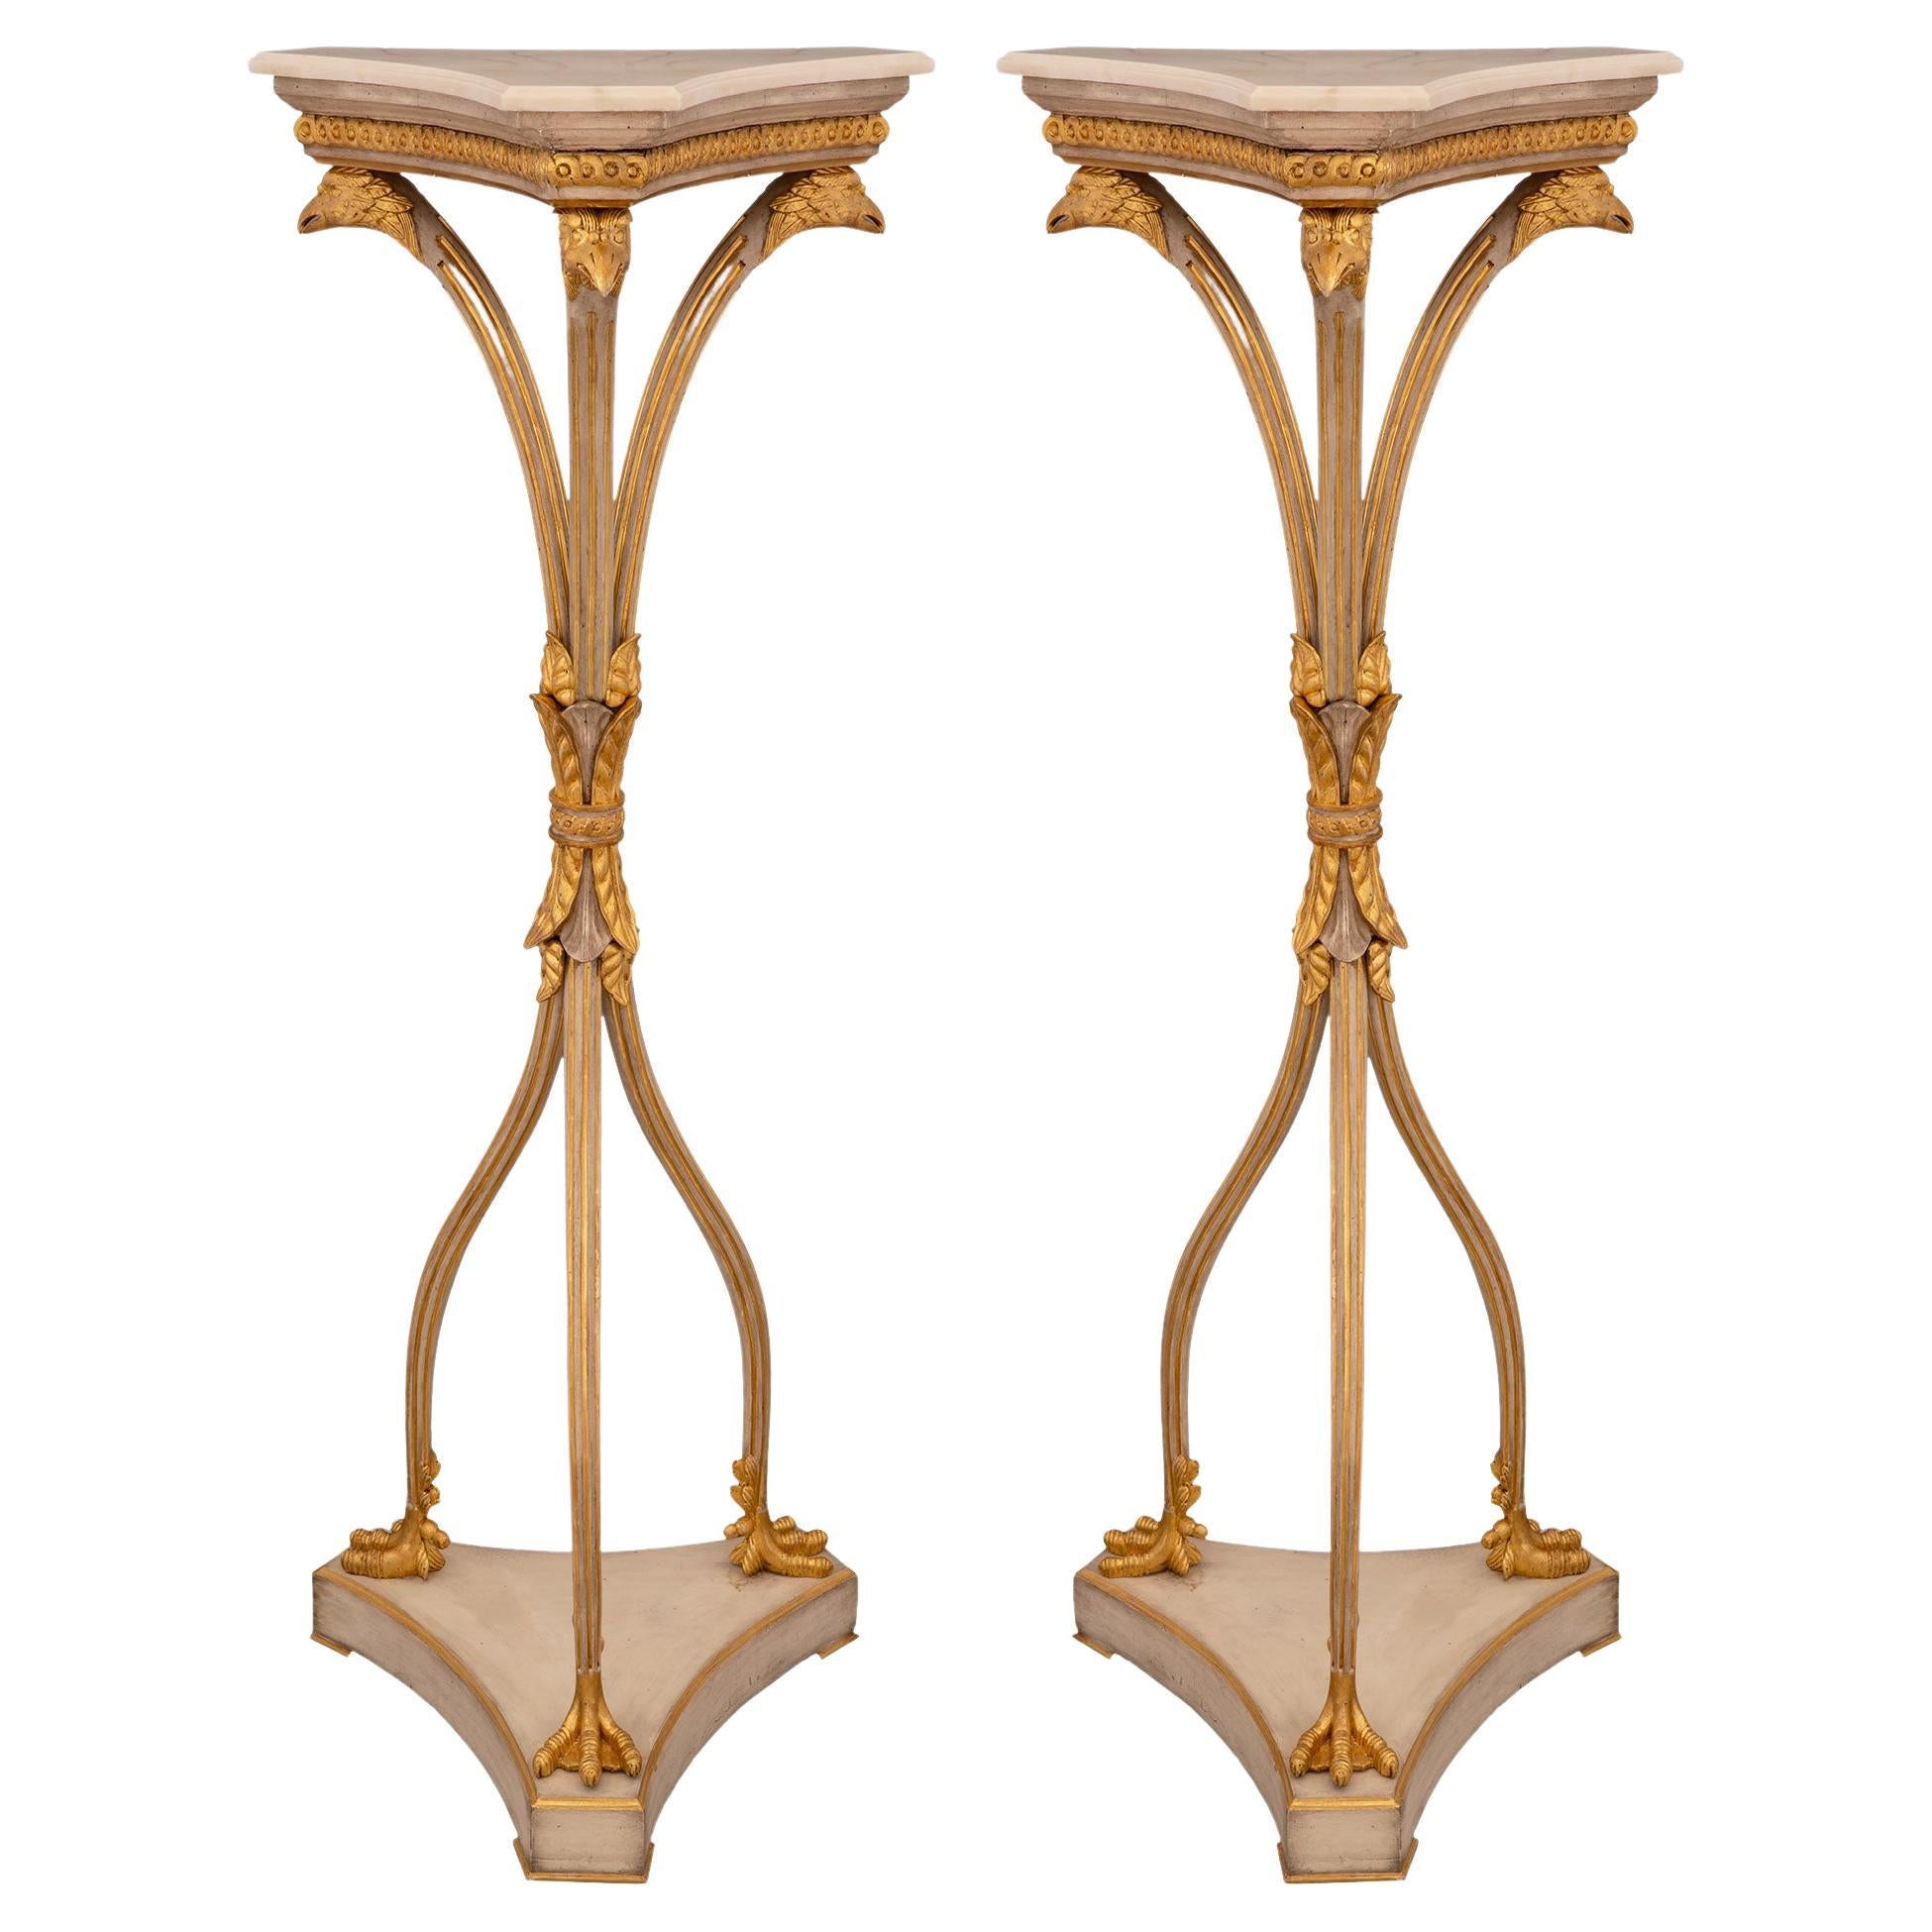 Pair of Italian 19th Century Neoclassical Style Giltwood and Alabaster Pedestals